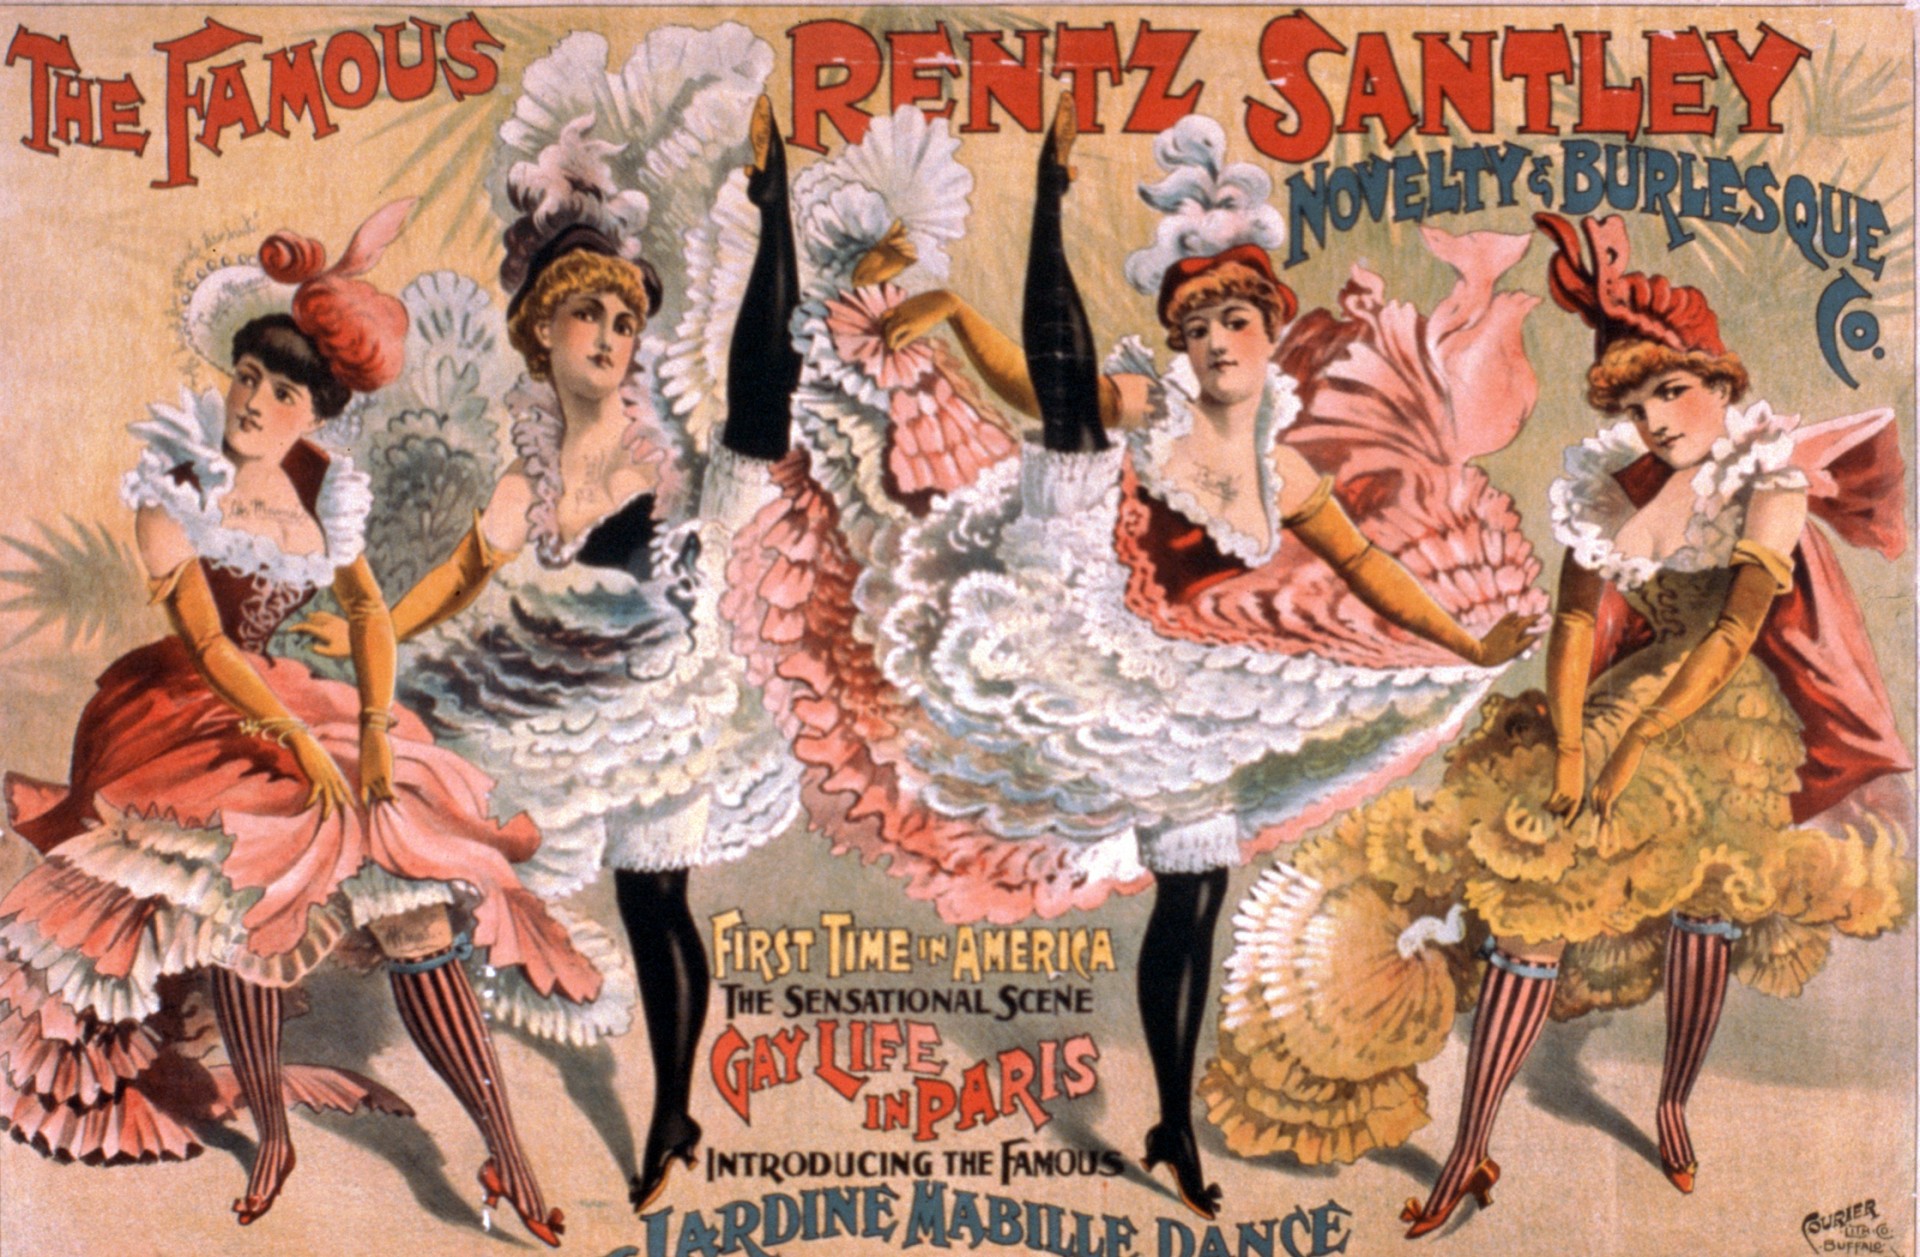 Public domain vintage poster for the french can can dancers